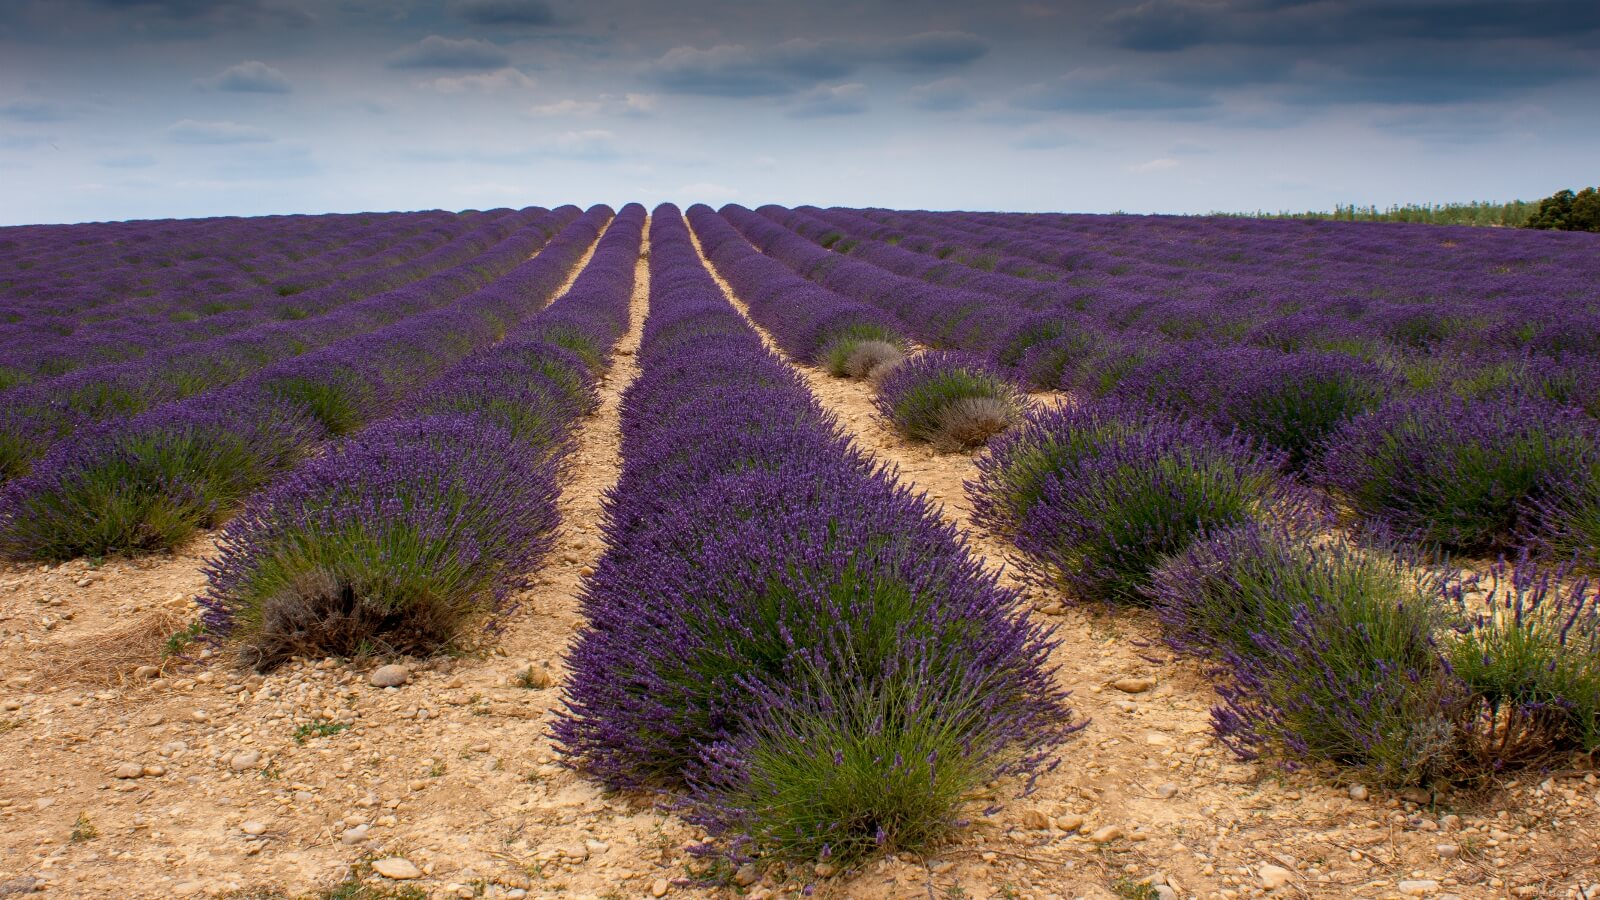 Image of Stone House in the Lavender Field, Valensole by Anže Barle